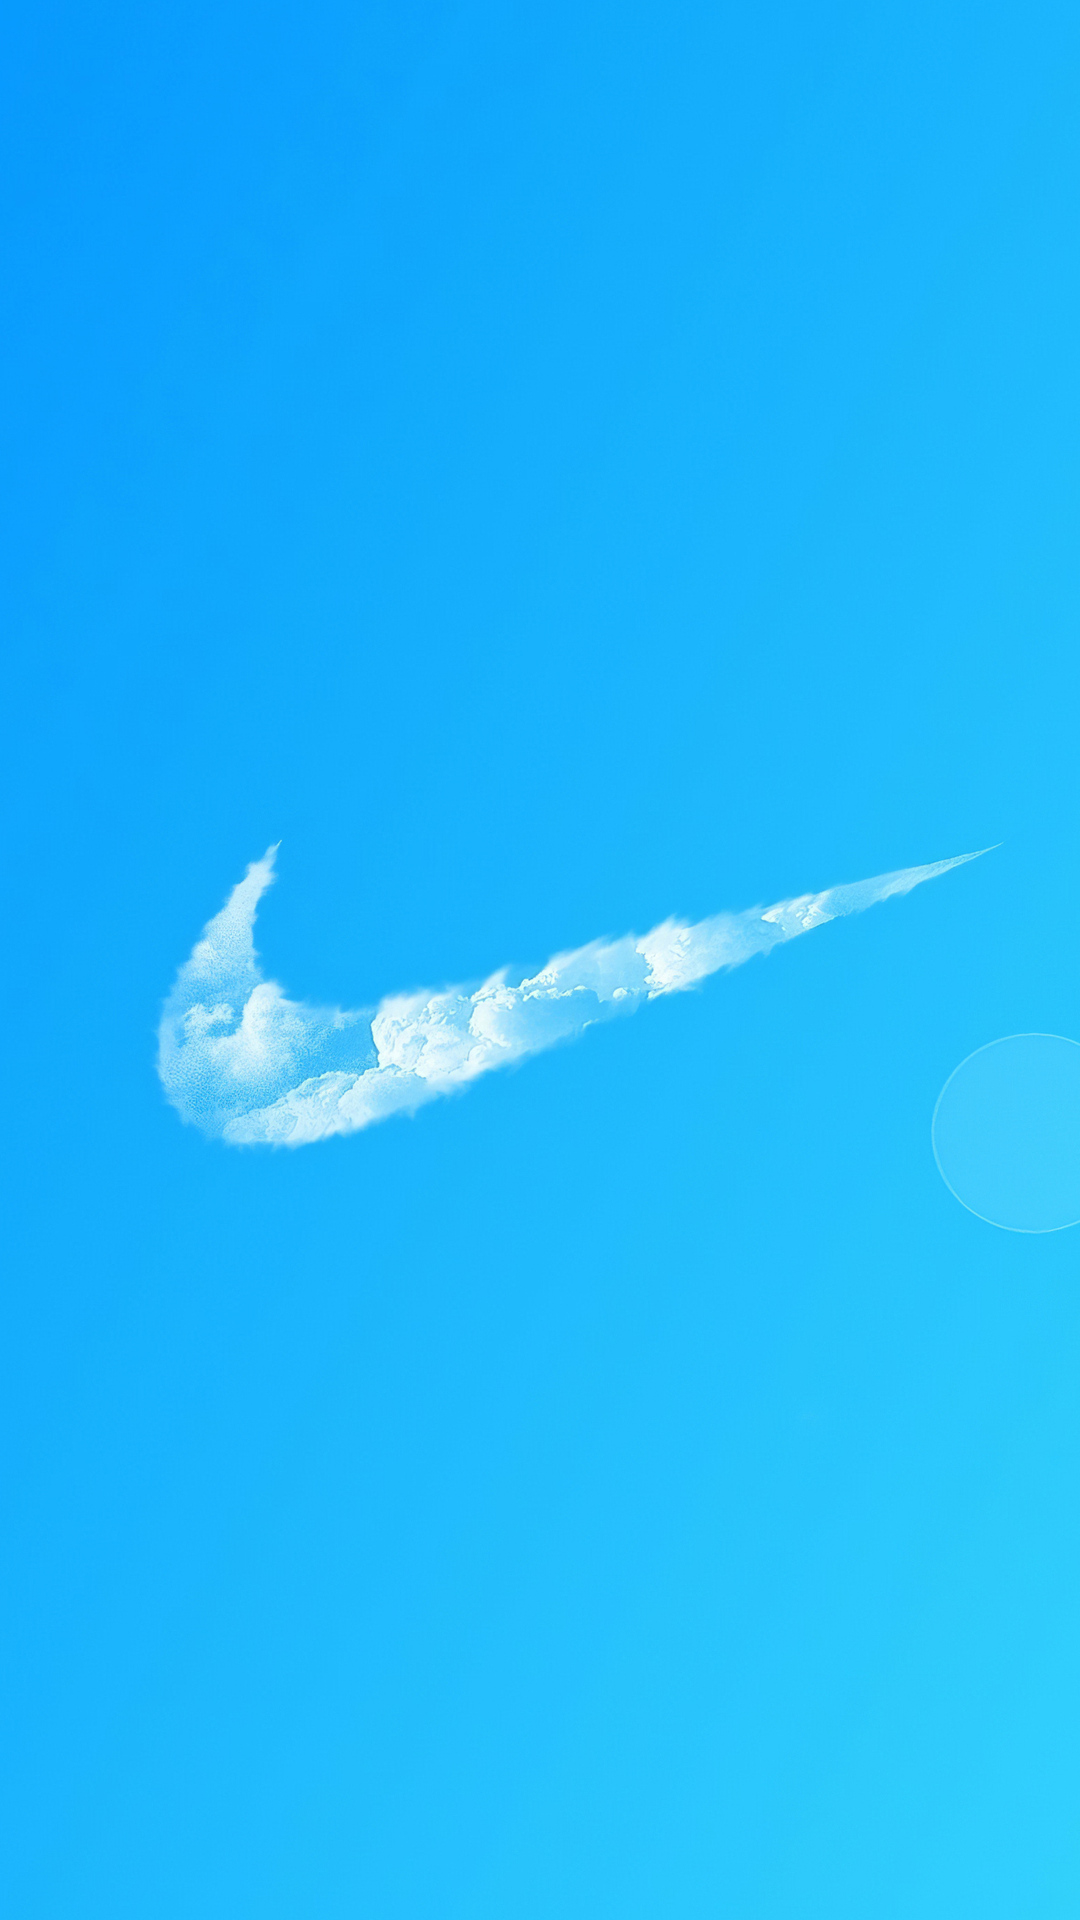 Nike Logo In Clouds 4k iPhone 6s, 6 Plus, Pixel xl , One Plus 3t, 5 HD 4k Wallpaper, Image, Background, Photo and Picture